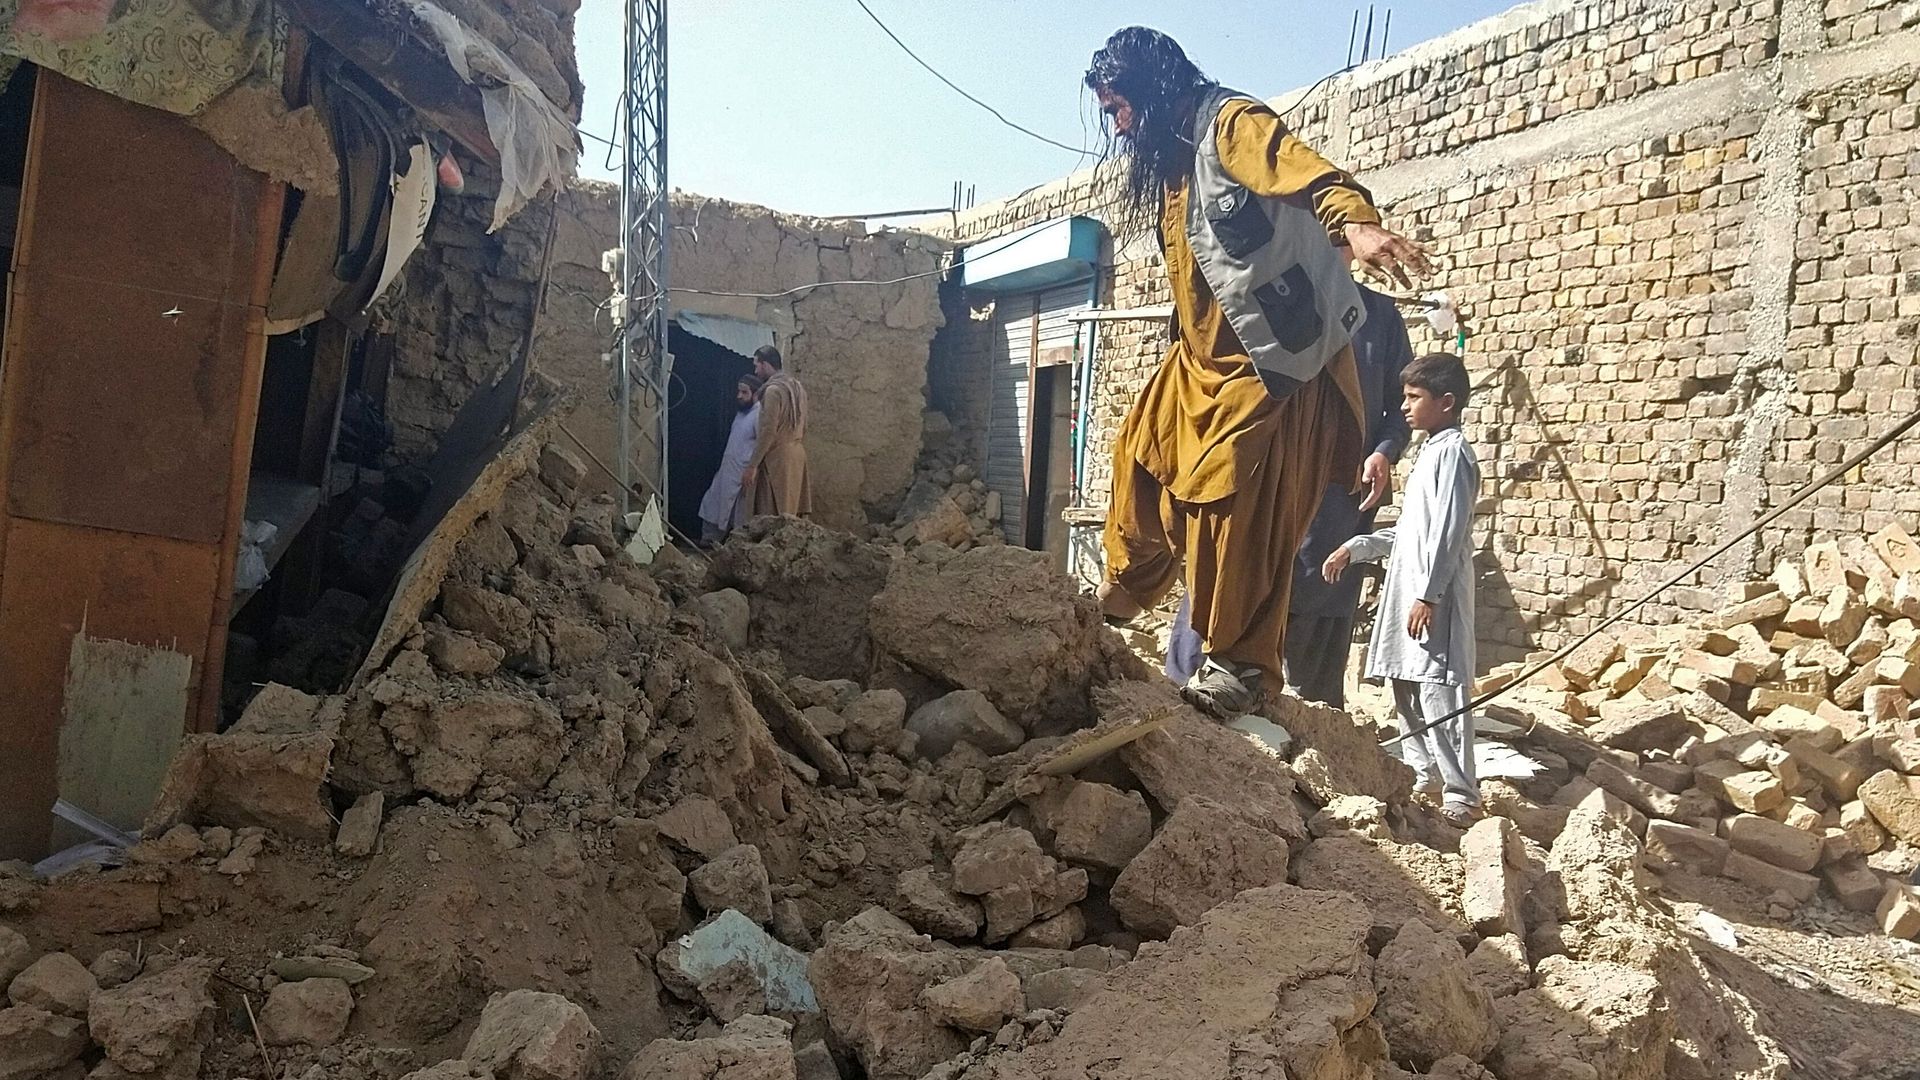  Residents gather next to the debris of their houses that collapsed following an earthquake in the remote mountainous district of Harnai on October 7.